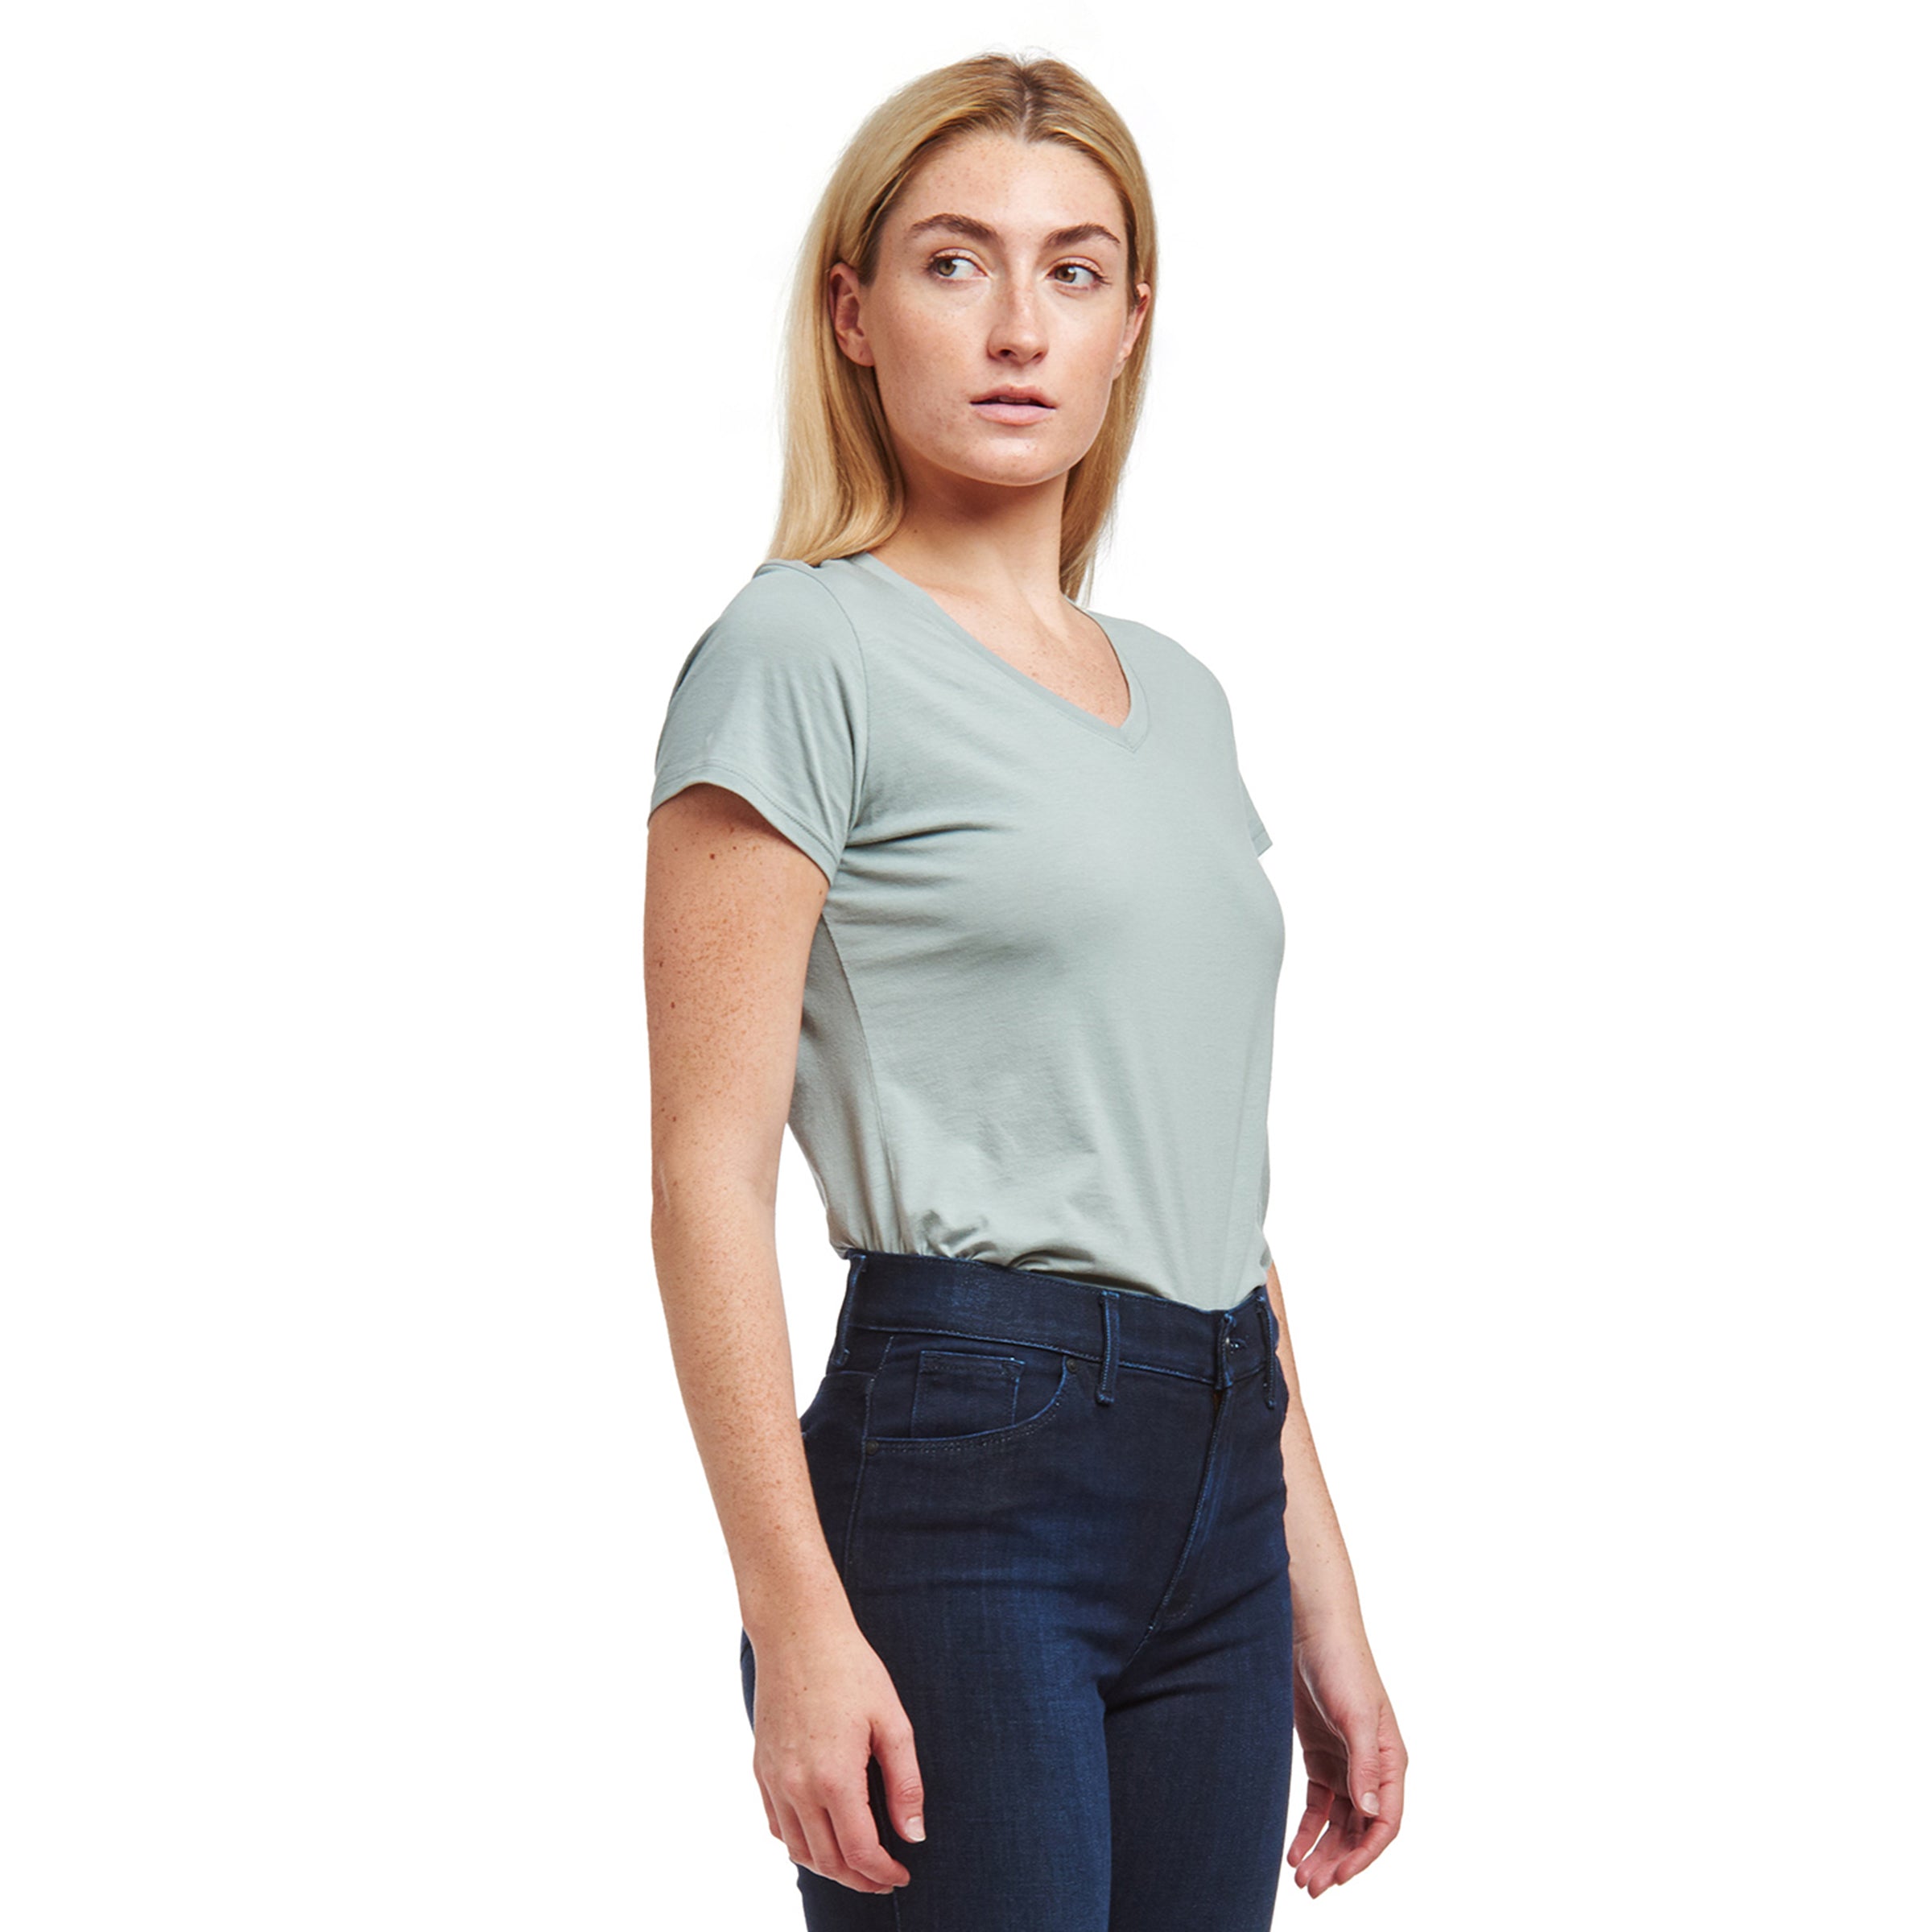 Women wearing Vino Fitted V-Neck Marcy Tee